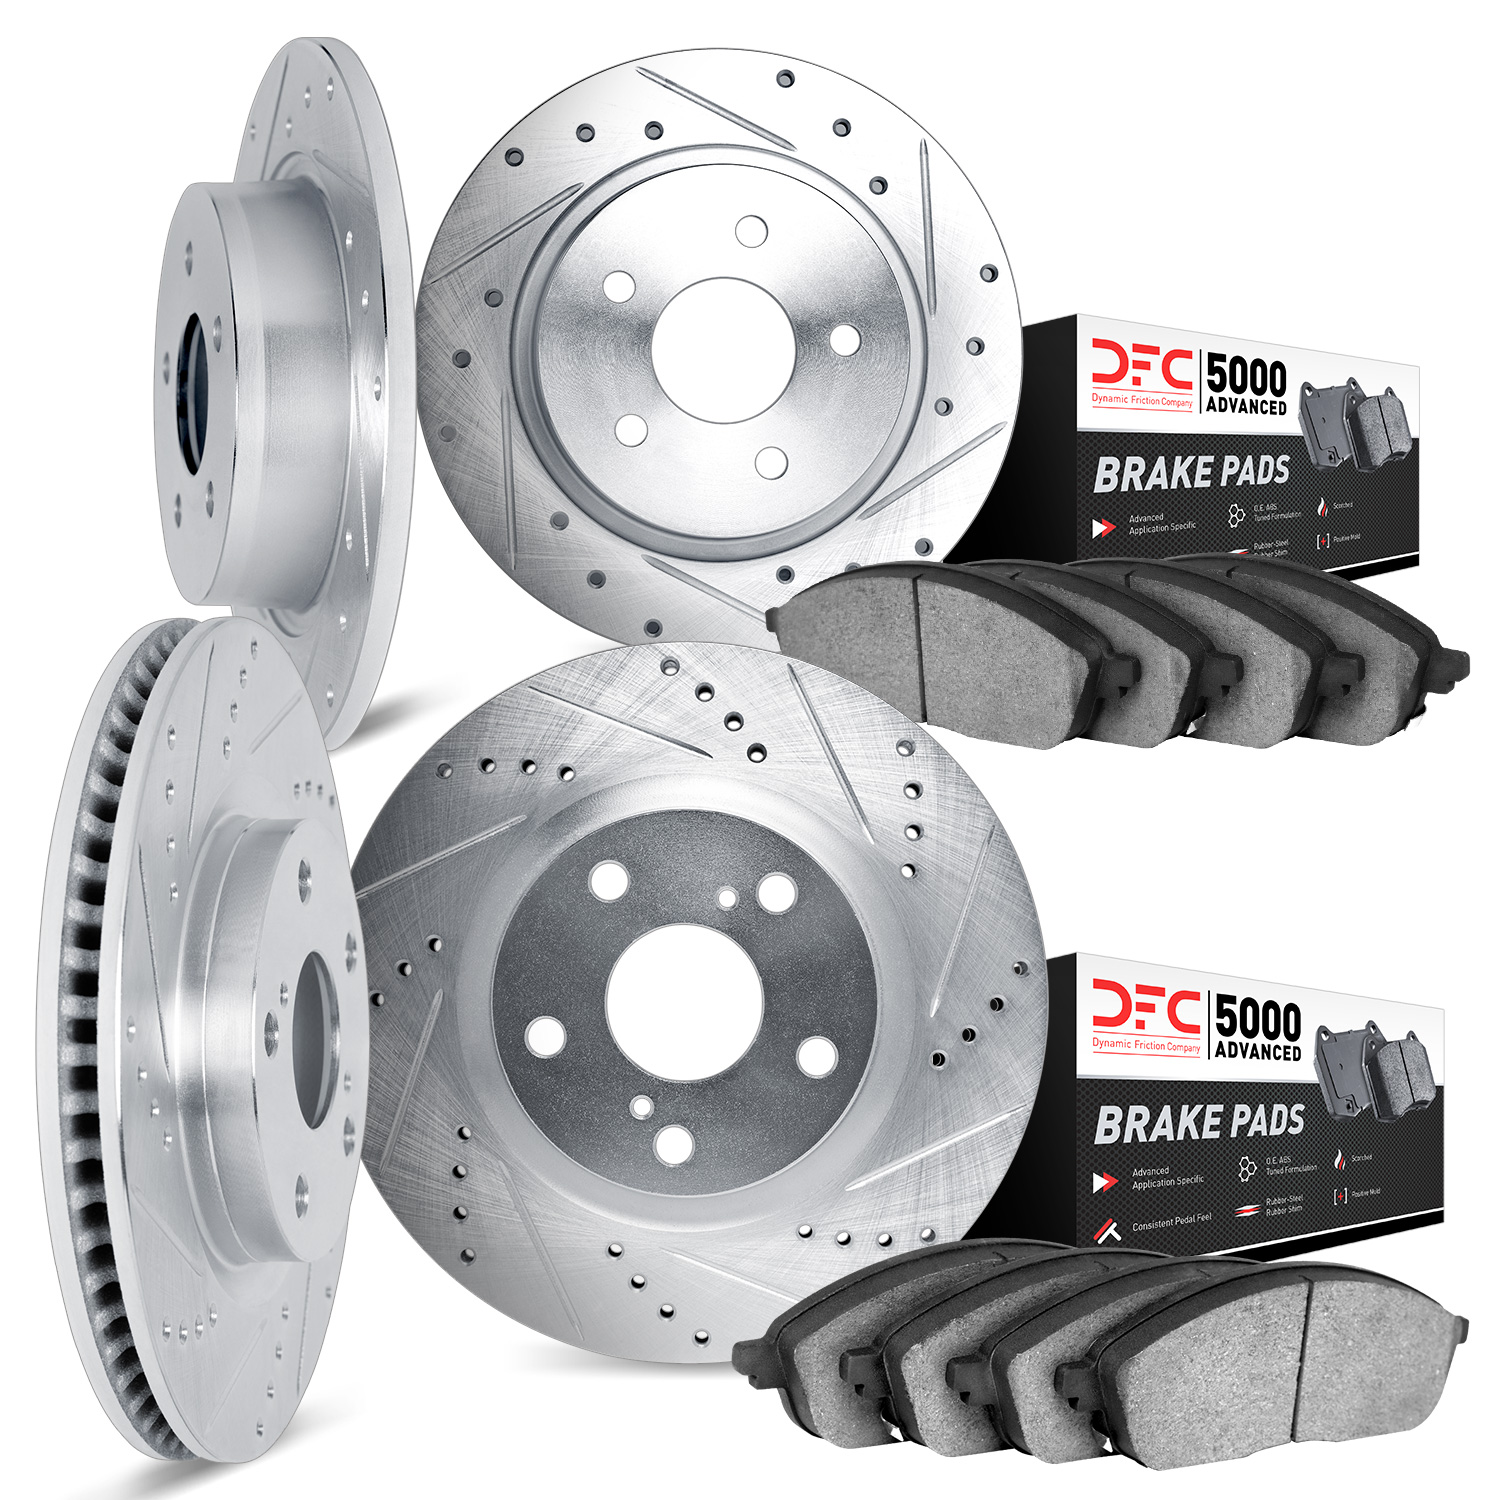 7504-67087 Drilled/Slotted Brake Rotors w/5000 Advanced Brake Pads Kit [Silver], 1989-1990 Infiniti/Nissan, Position: Front and